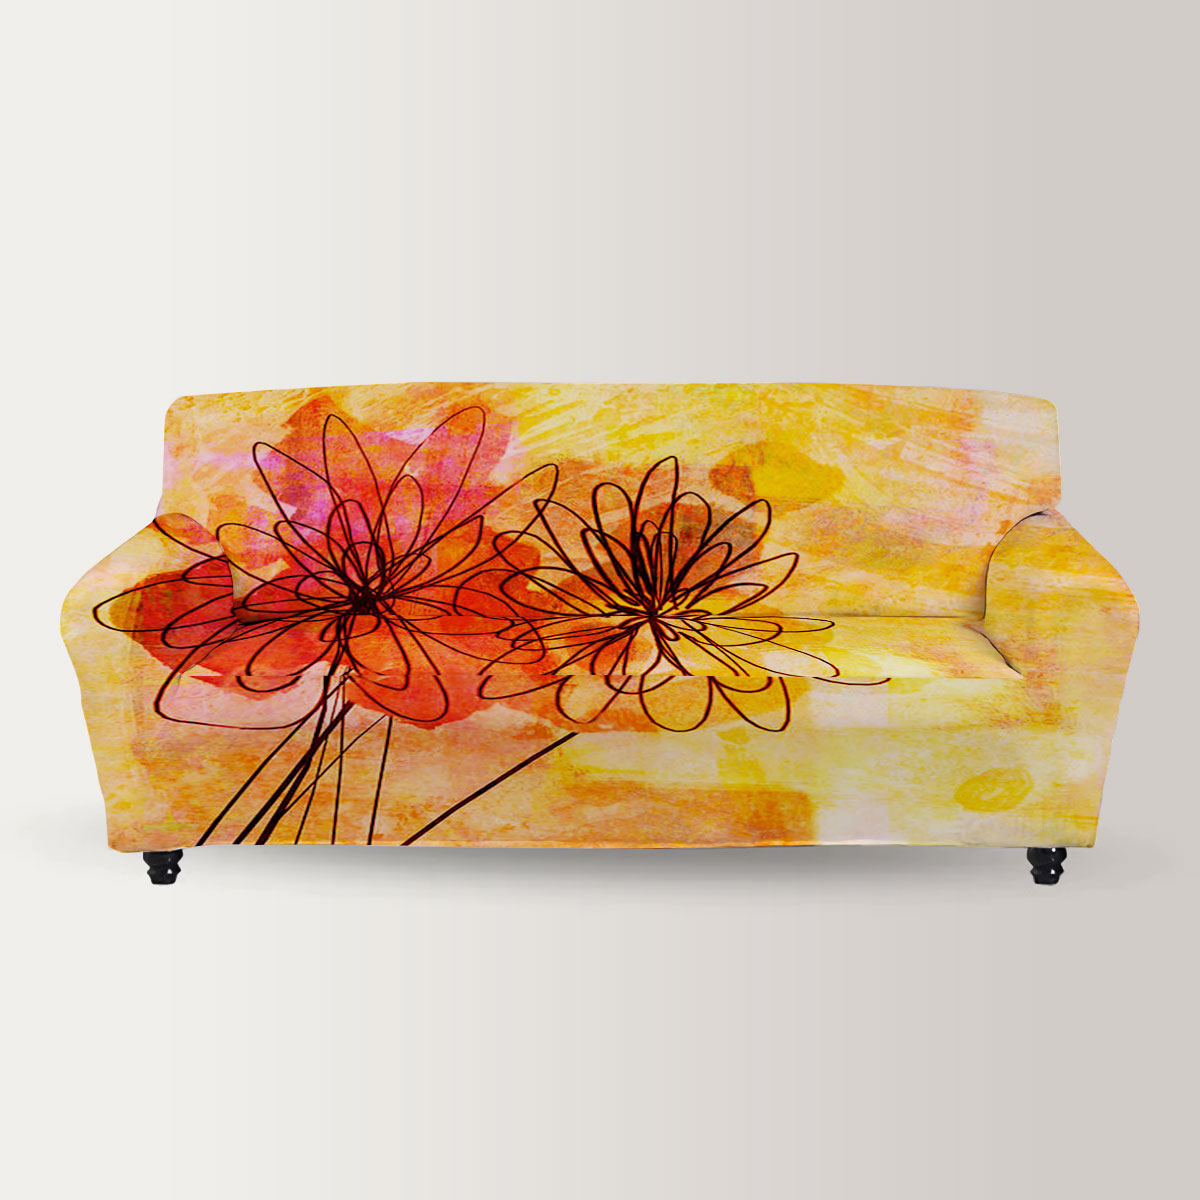 Floral Whimsy Abstract Sofa Cover_2_1